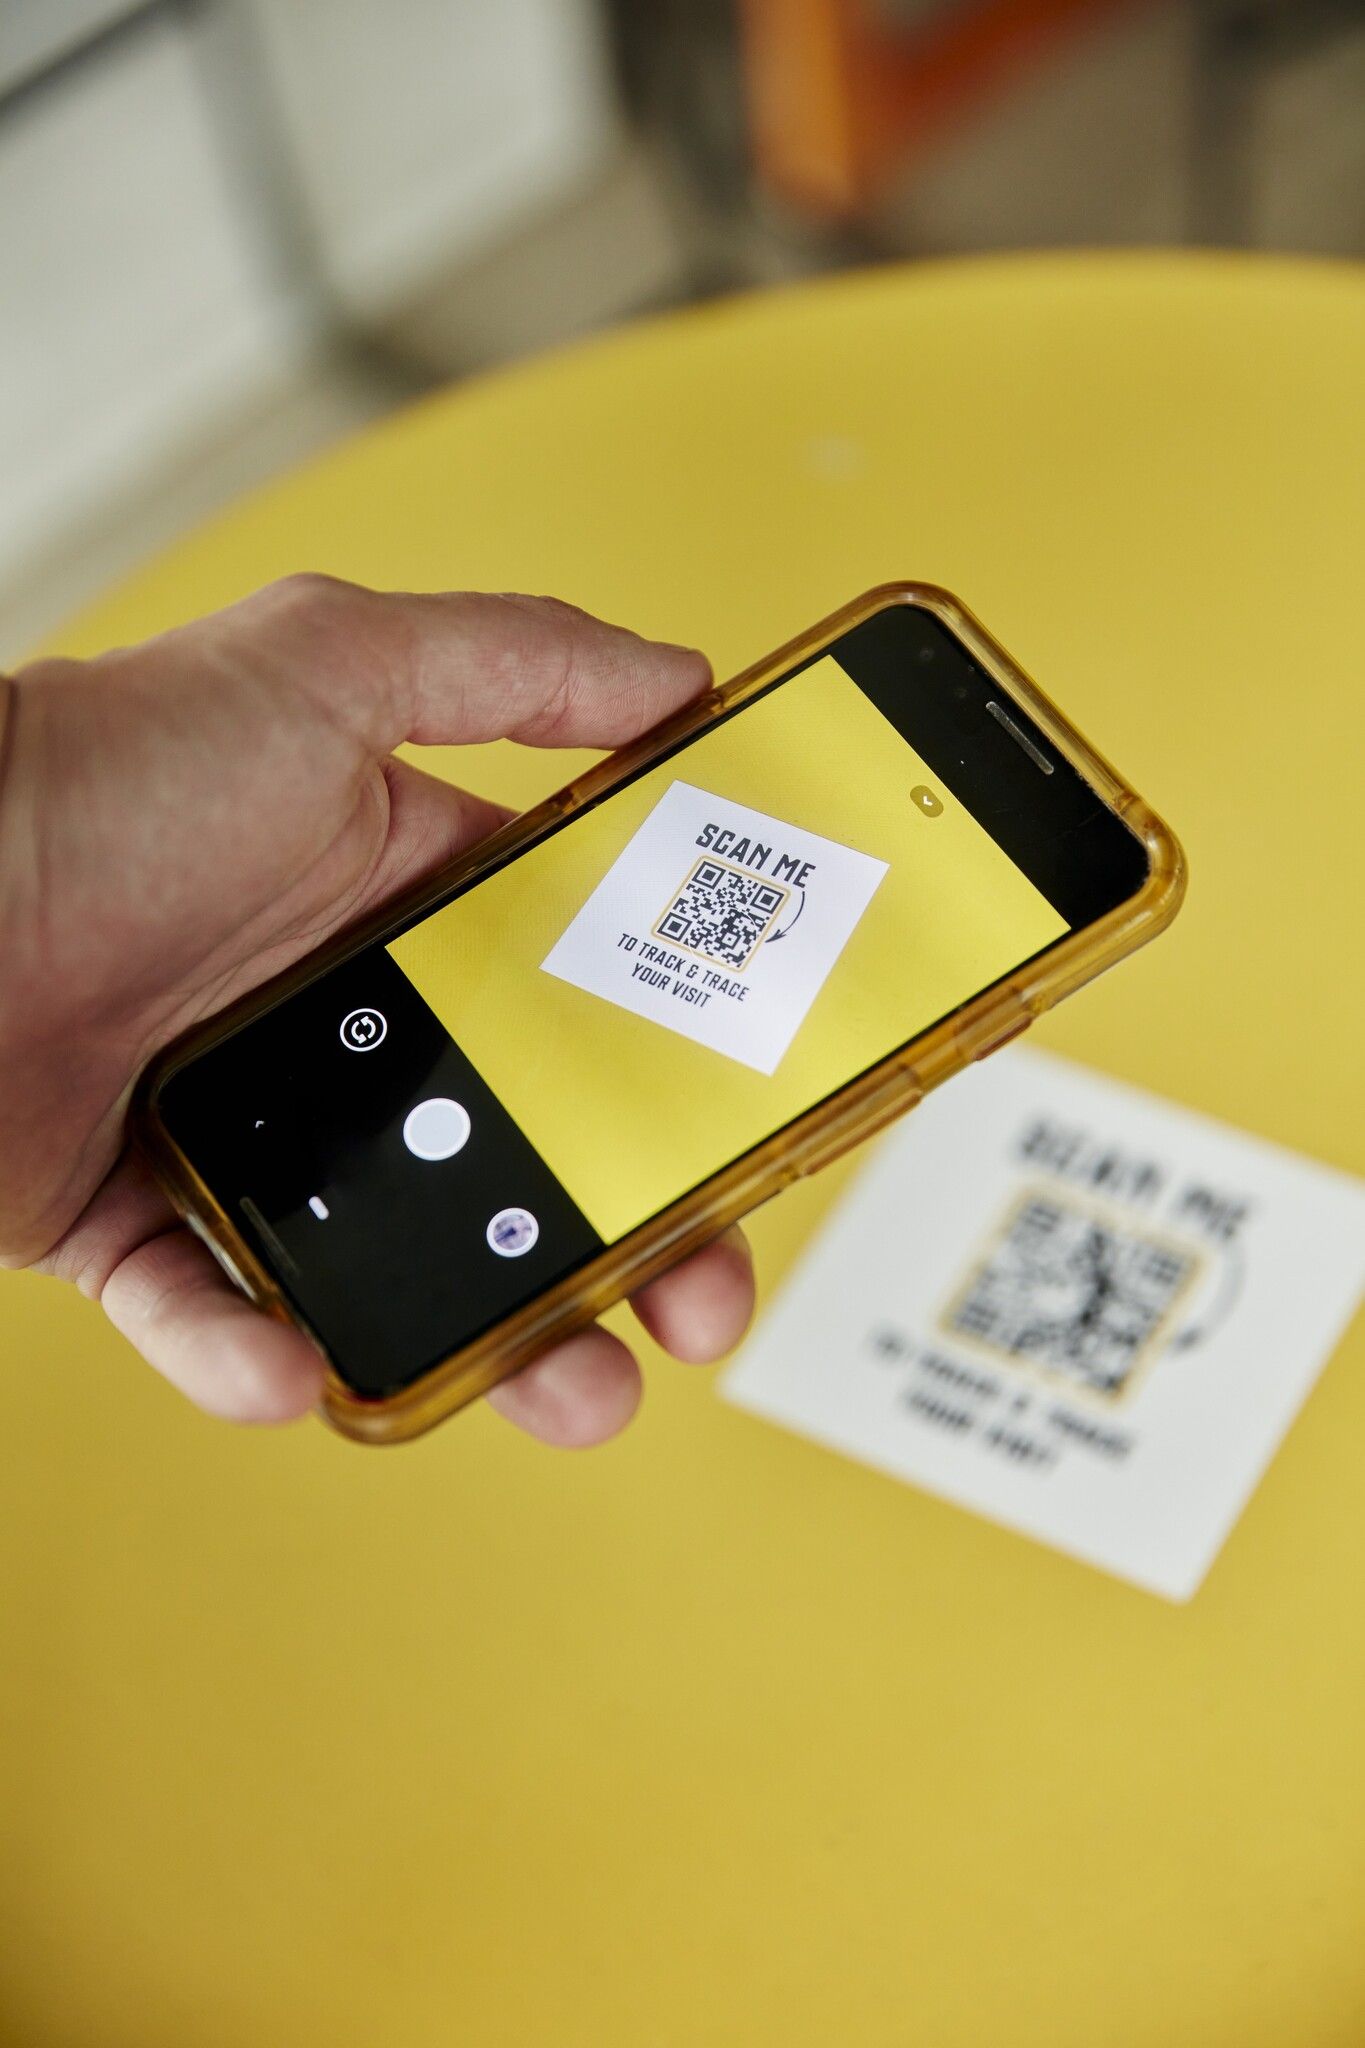 A phone scanning a QR code that says, "Scan me to track & trace your visit"